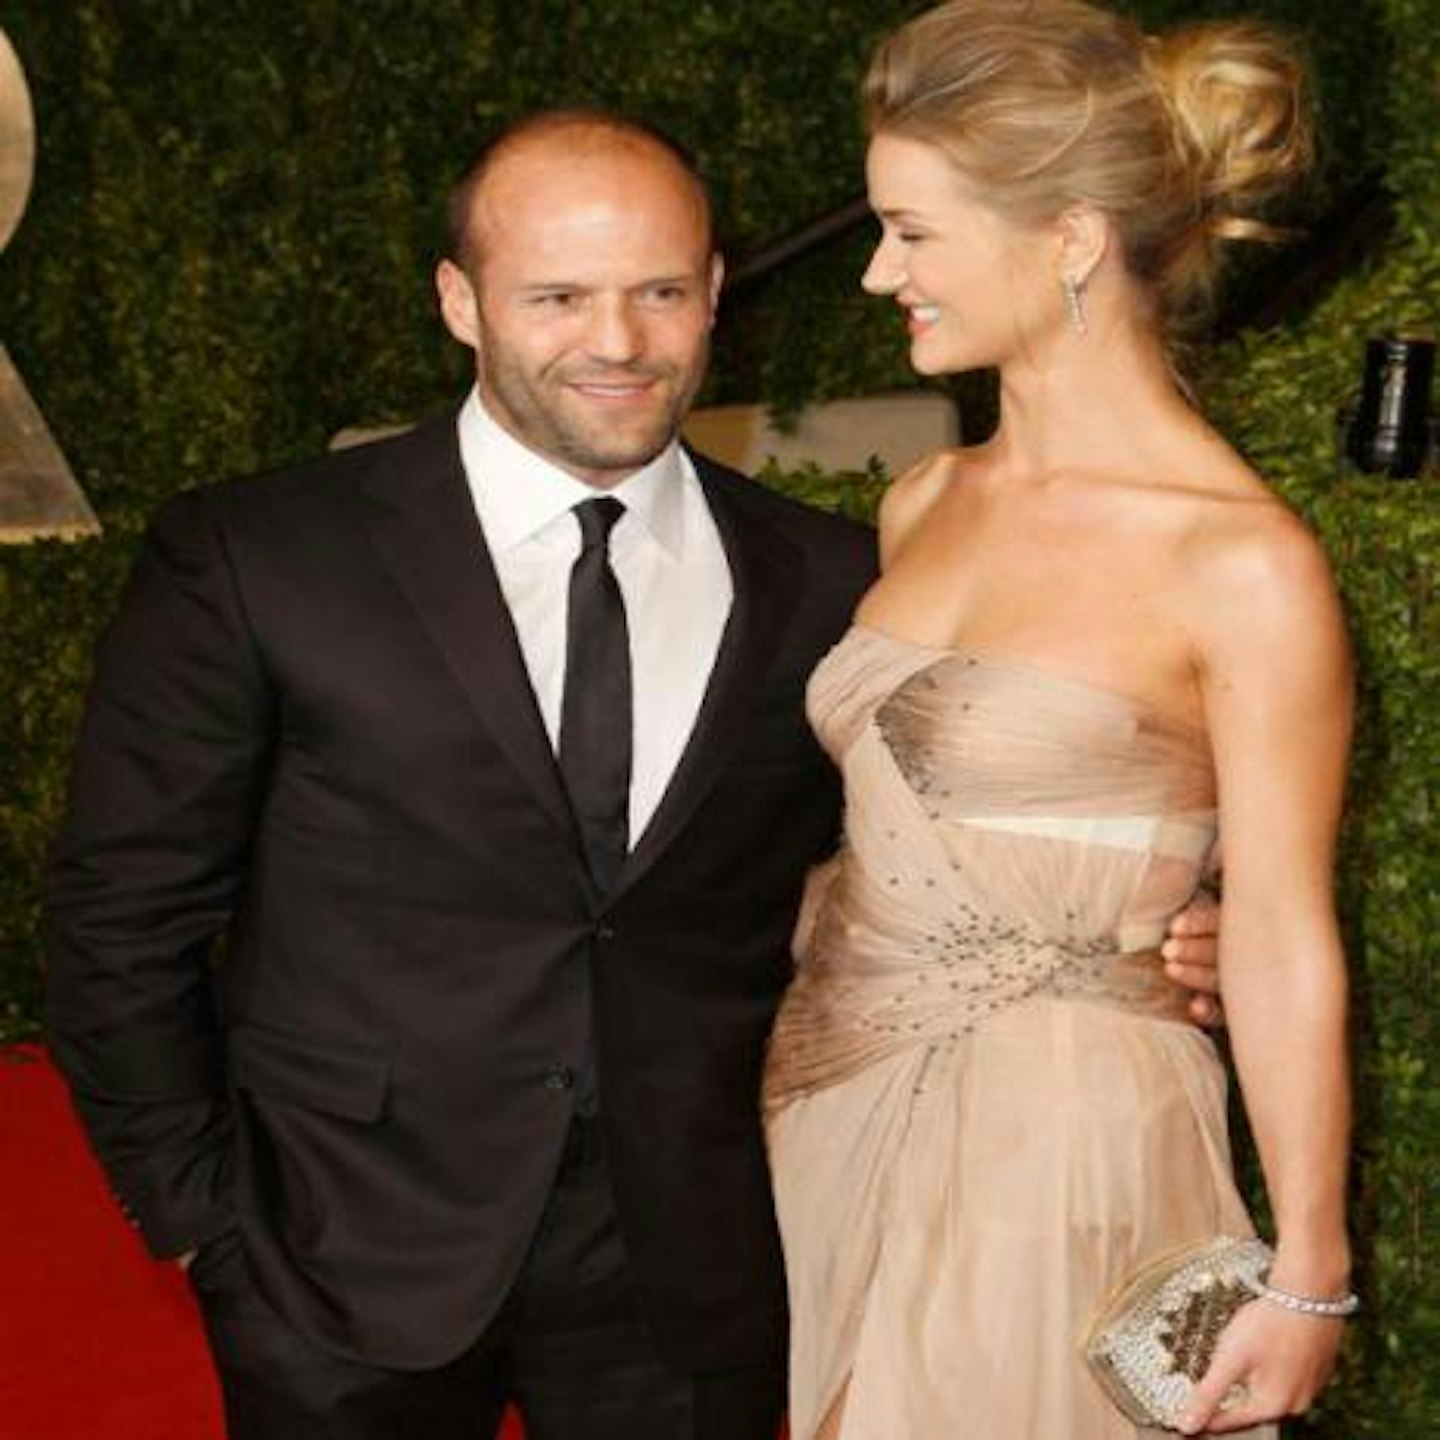 Rosie Huntington-Whiteley says she's with Jason Statham for stability